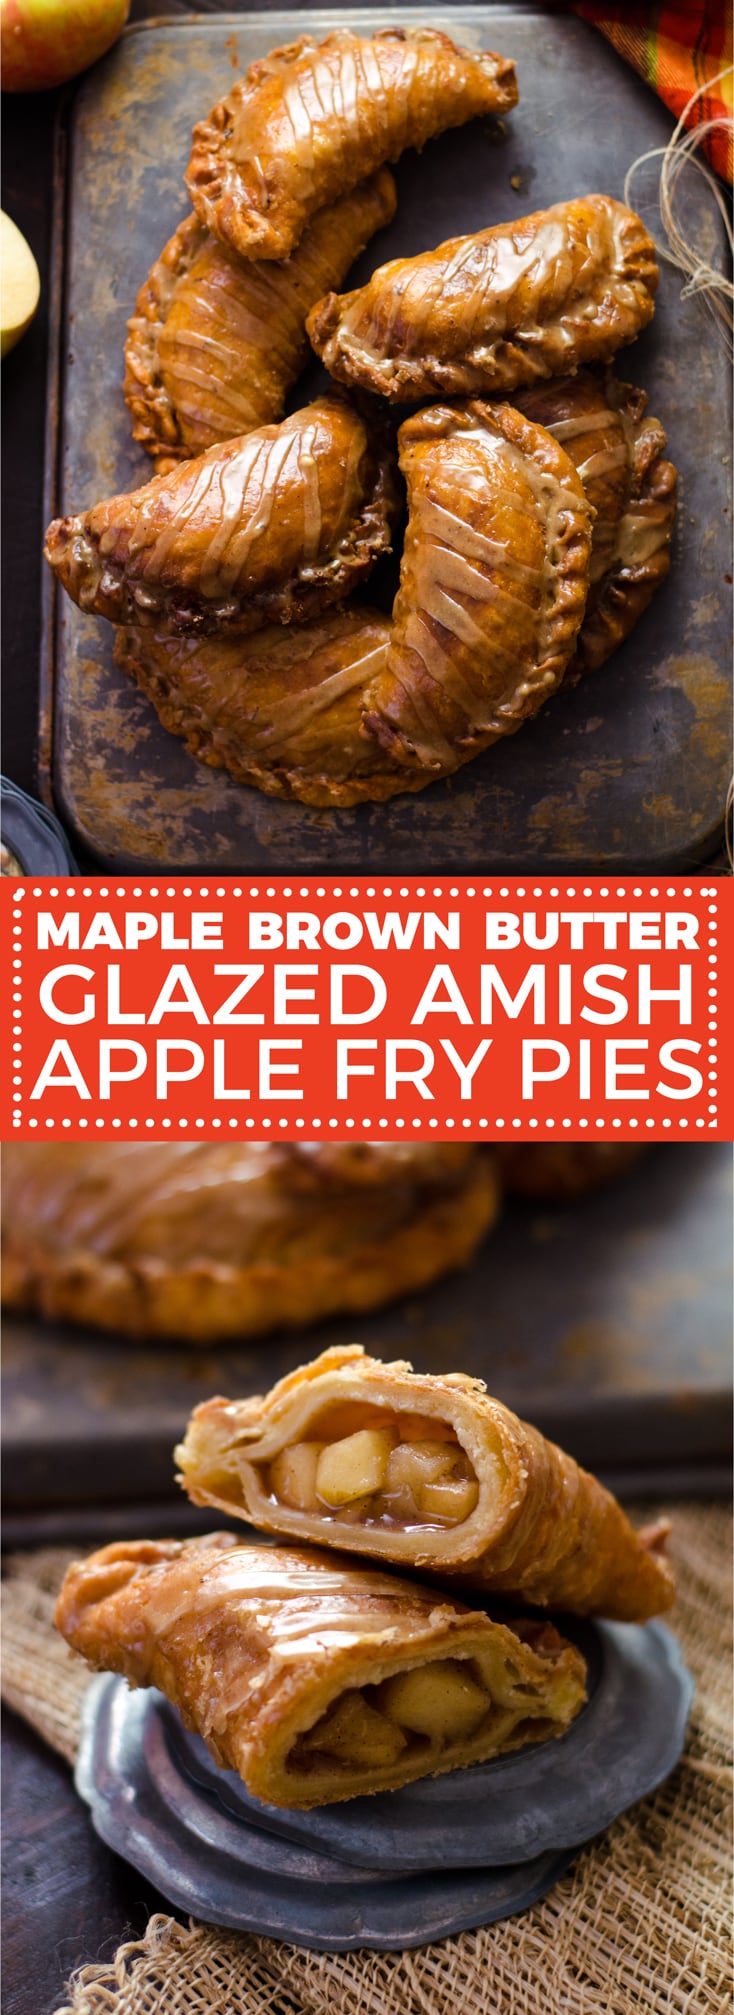 Maple Brown Butter Glazed Amish Apple Fry Pies. These sweet dessert snacks are hand-sized and perfect for a cold Fall day or Thanksgiving treat! | hostthetoast.com